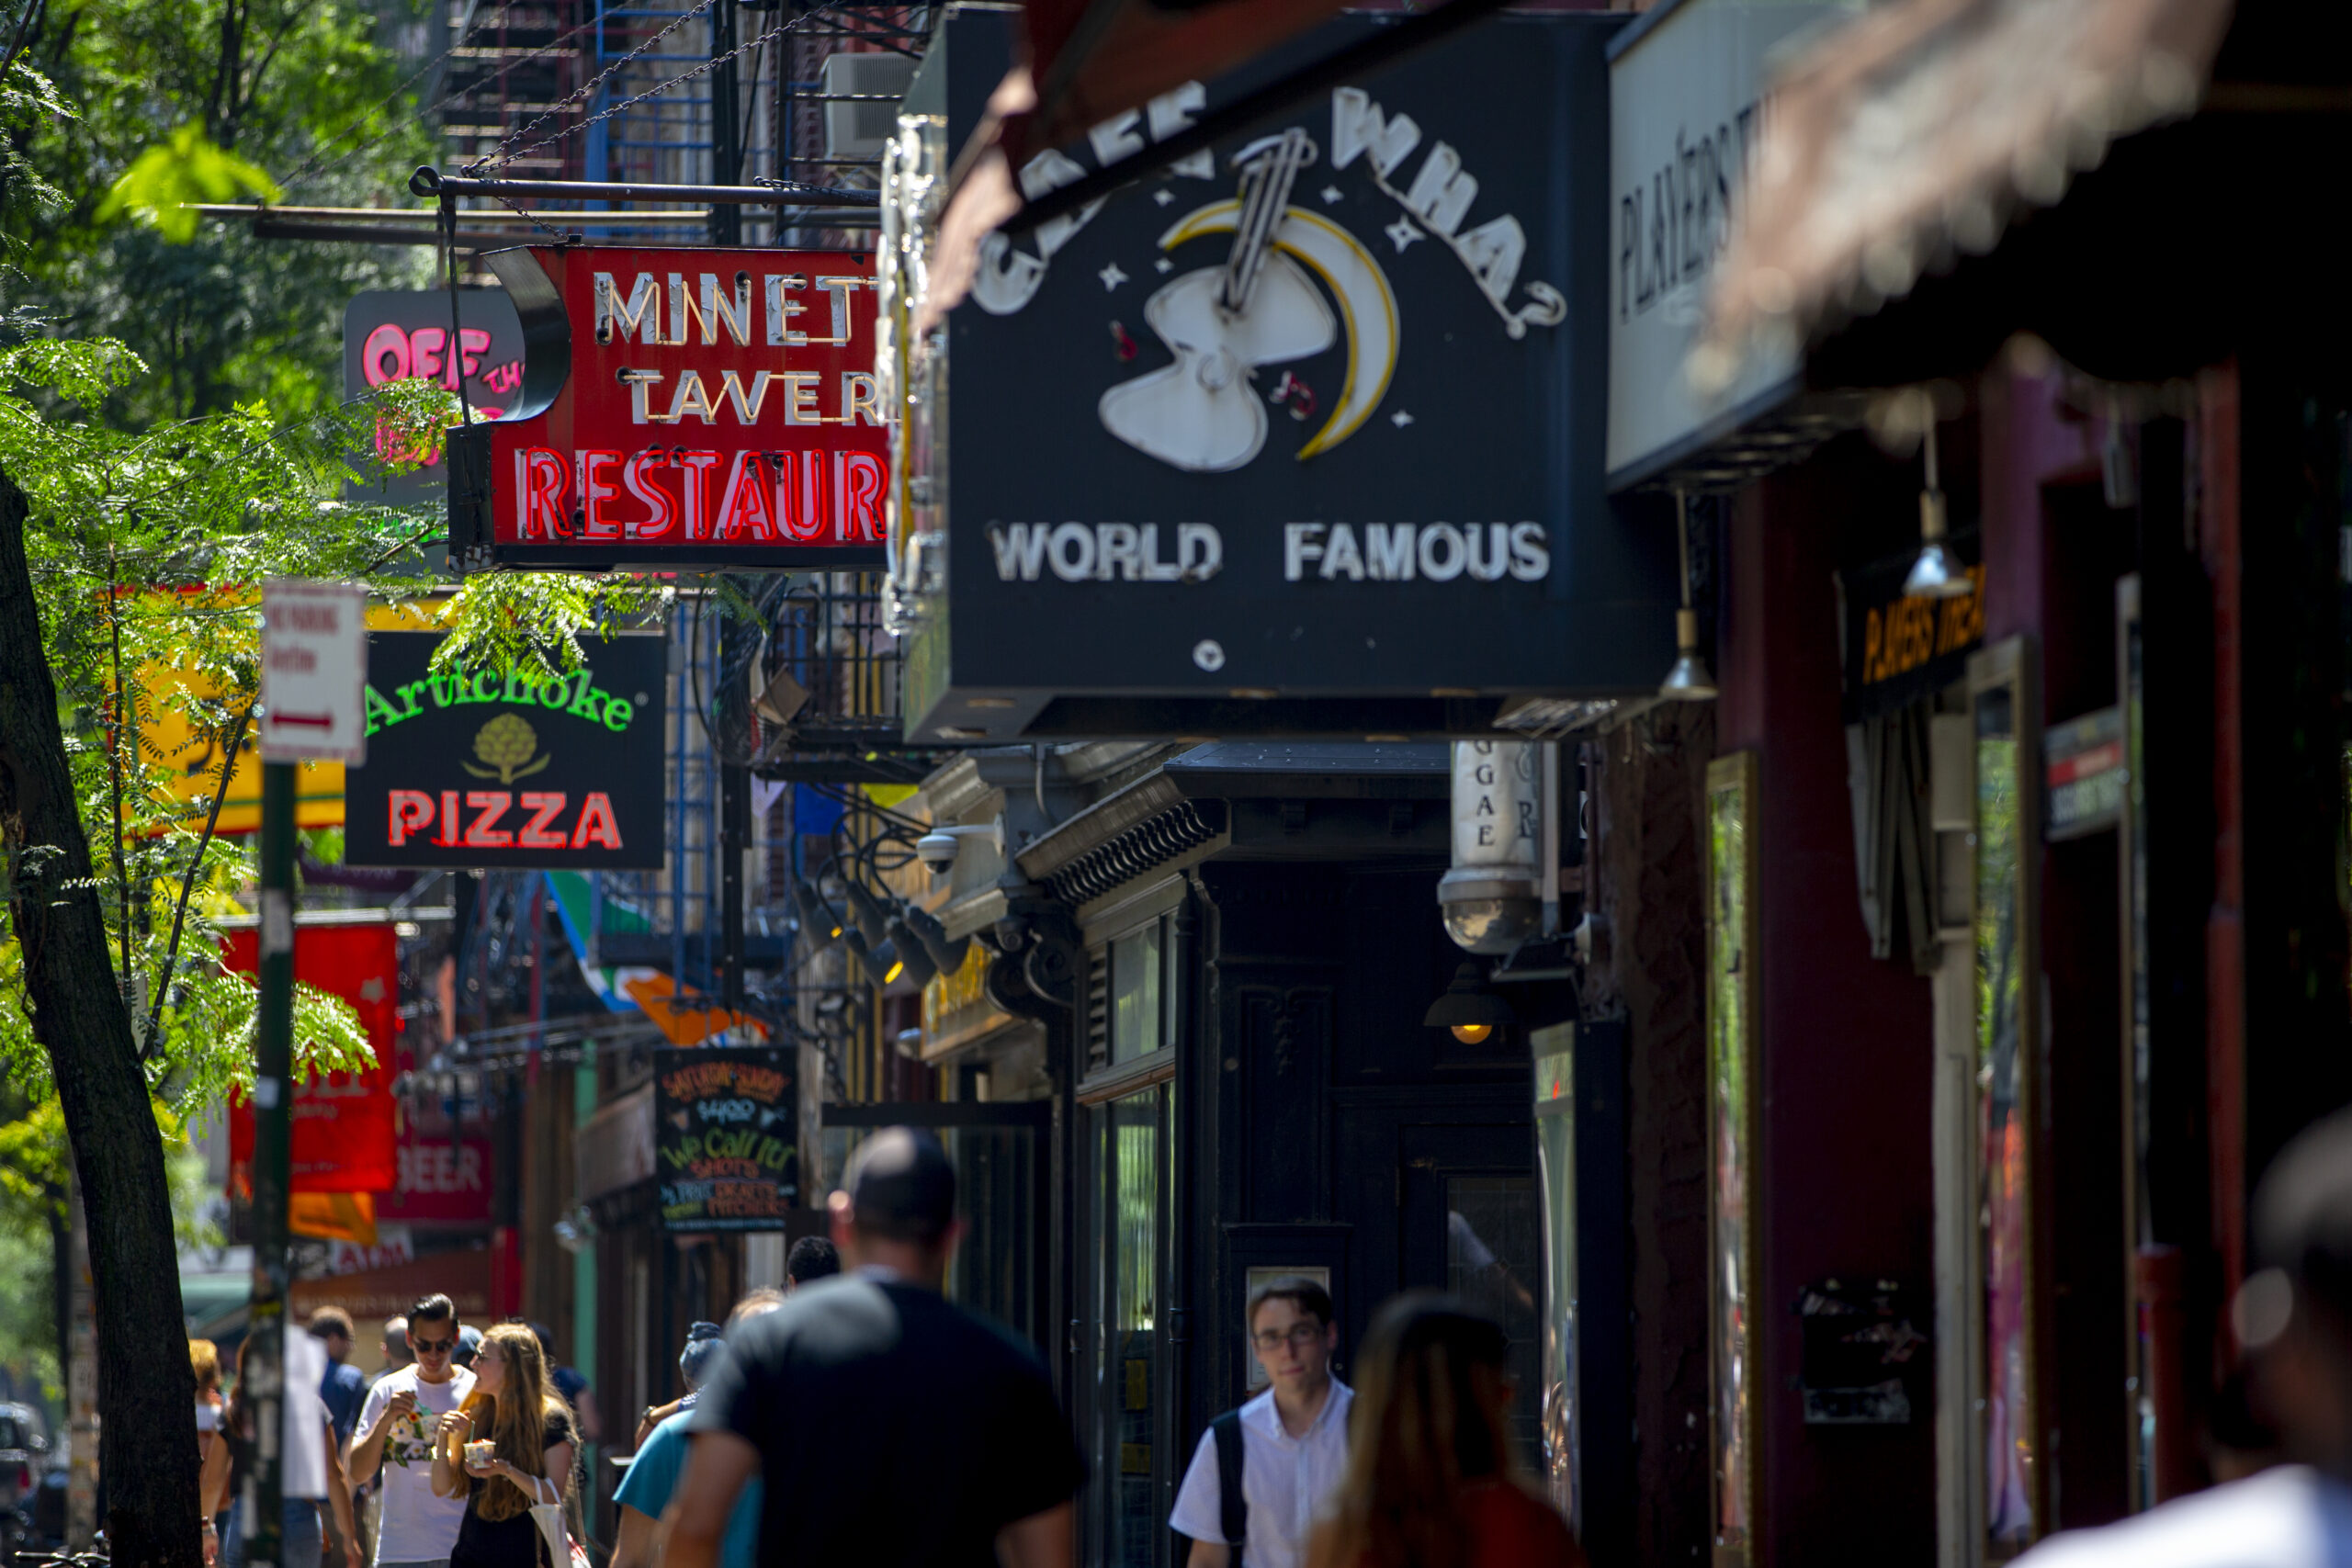 Busy Greenwich Village street lined with storefronts featuring vibrant signs elevated above eye level.